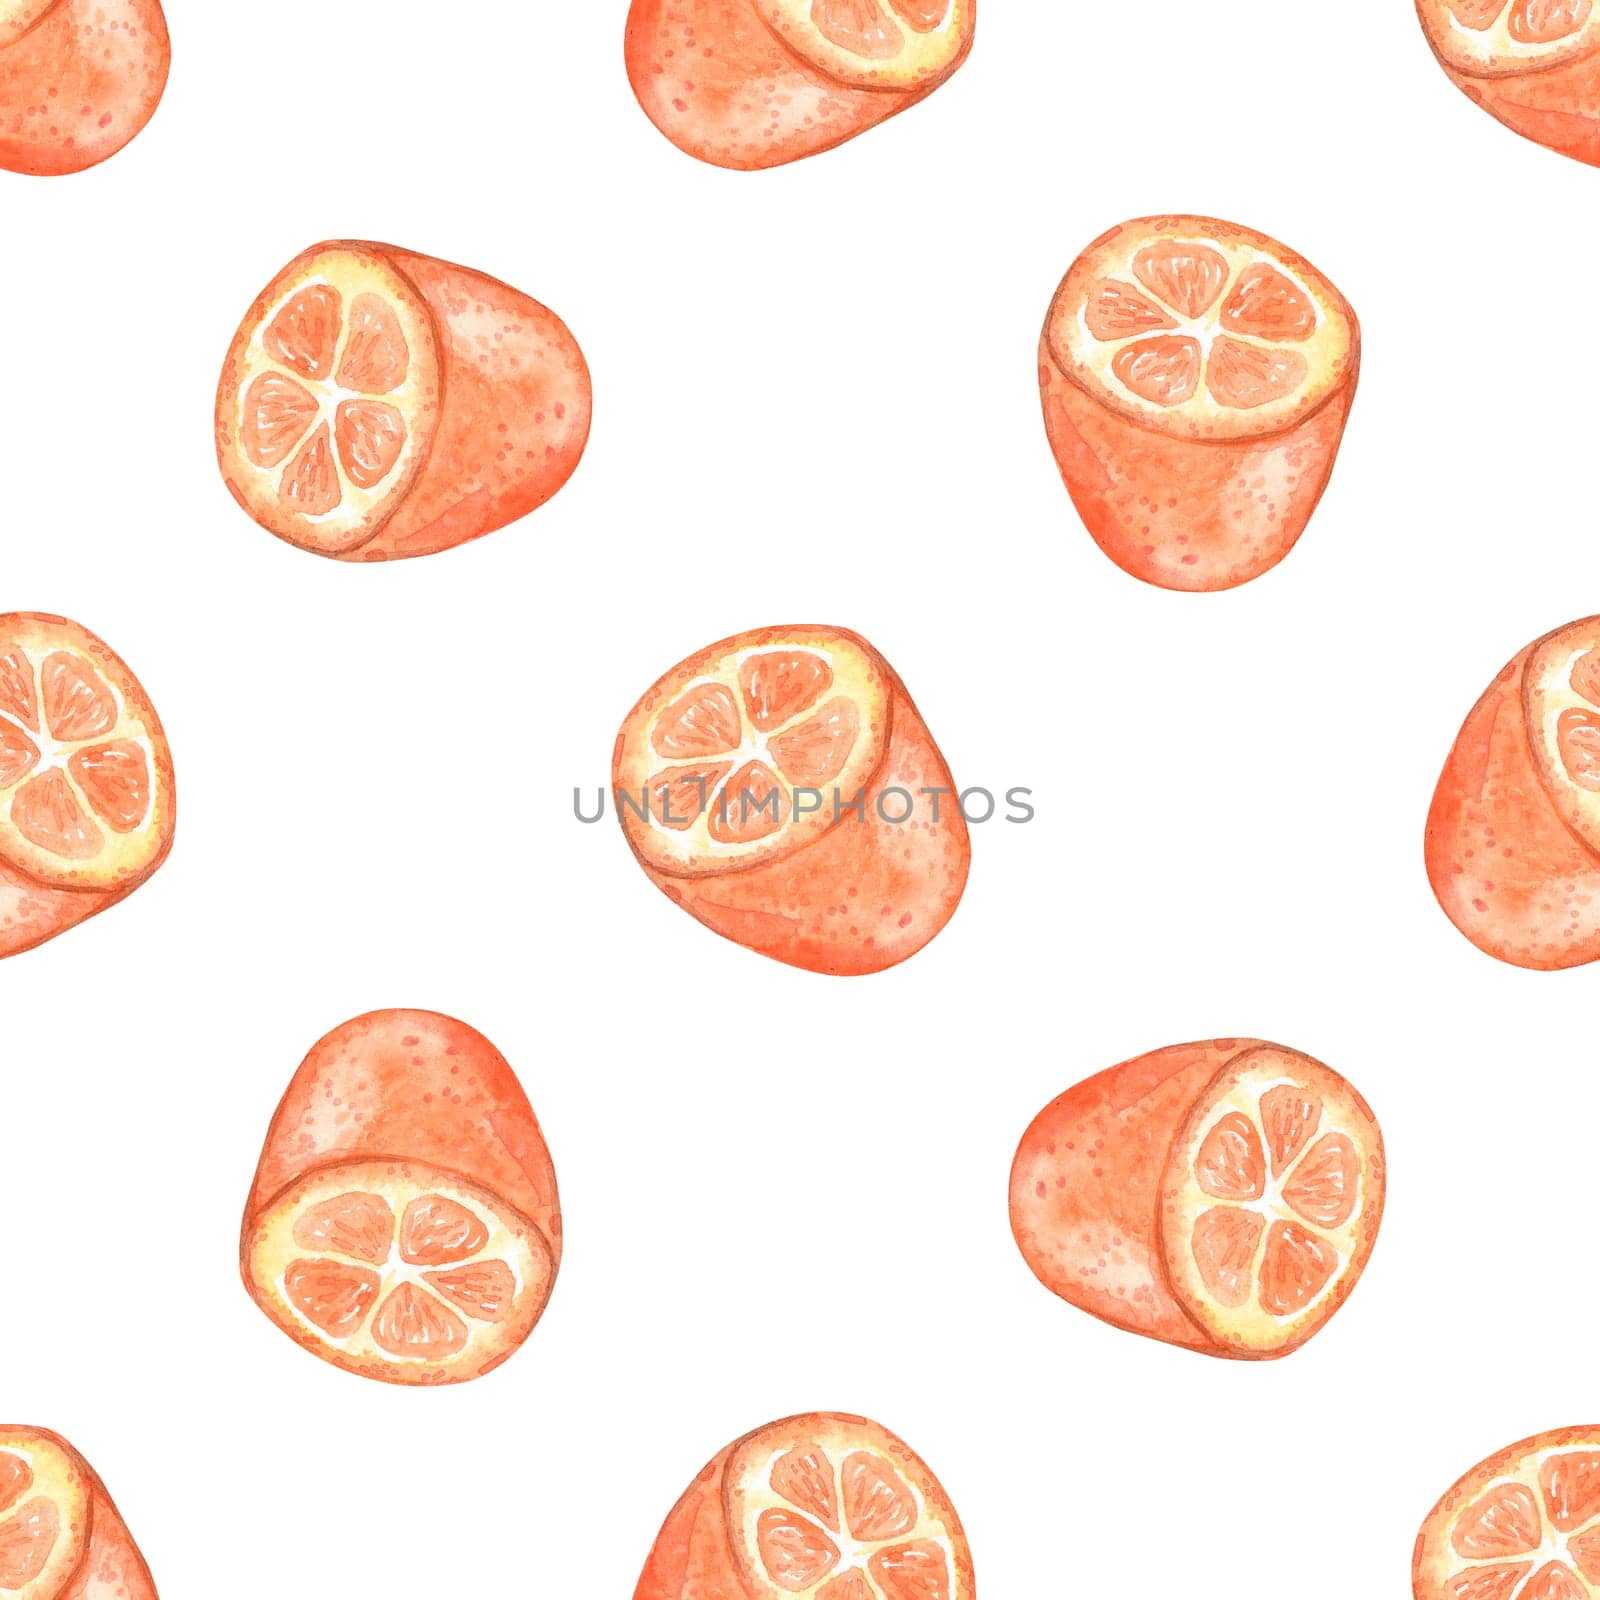 Watercolor cut kumquat fruit seamless pattern on white background for fabric, textile, wrapping, branding, scrapbook